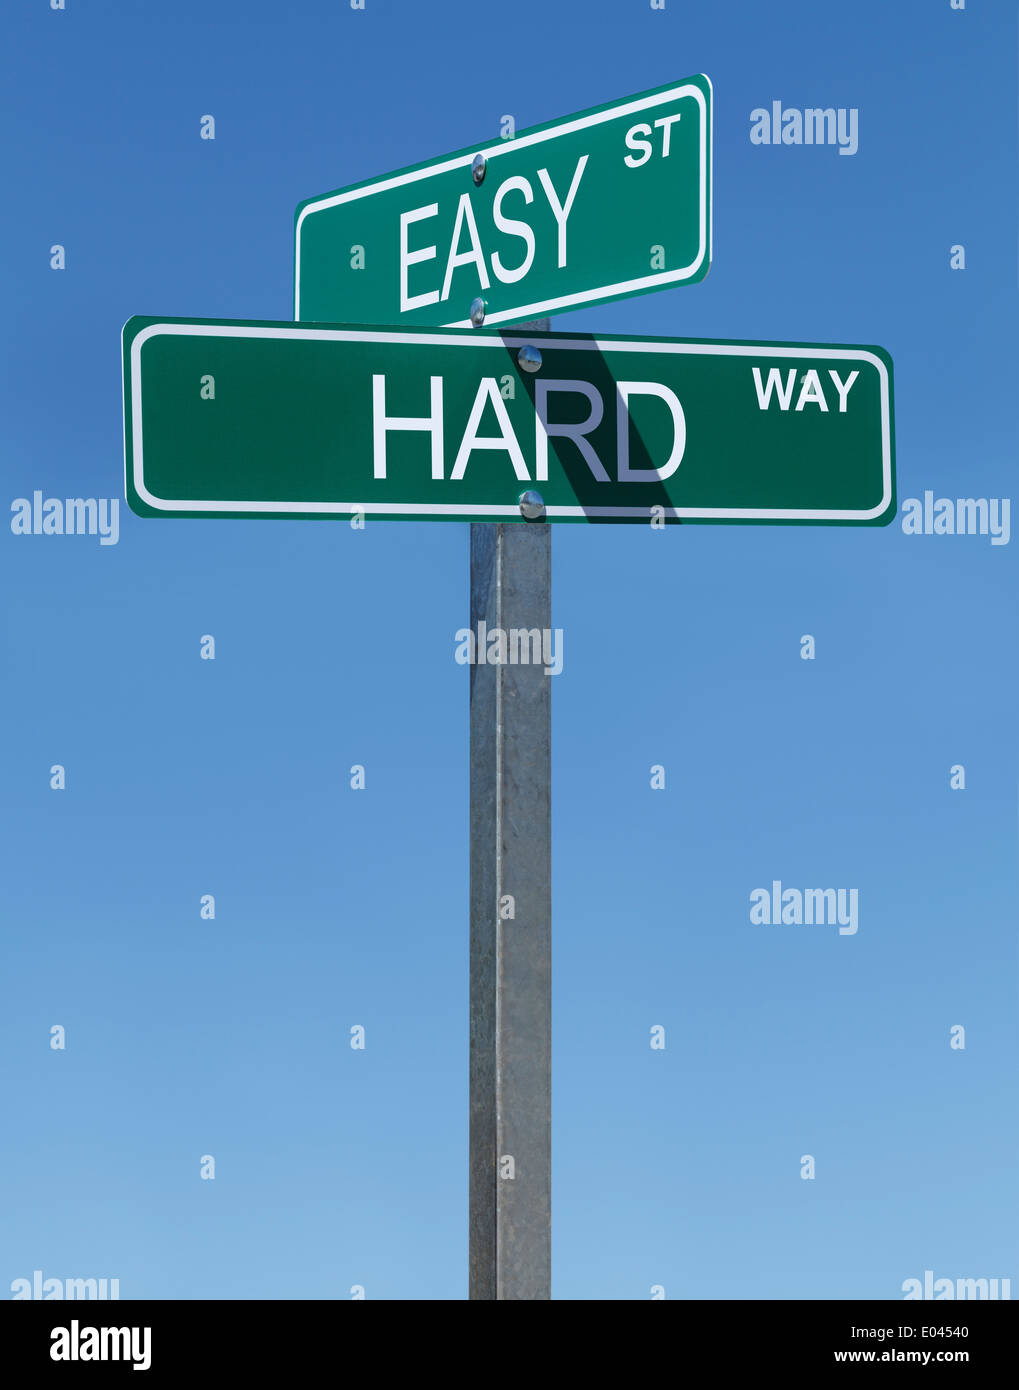 Two Green Street Signs Easy Street and Hard Way with Blue Sky Background. Stock Photo